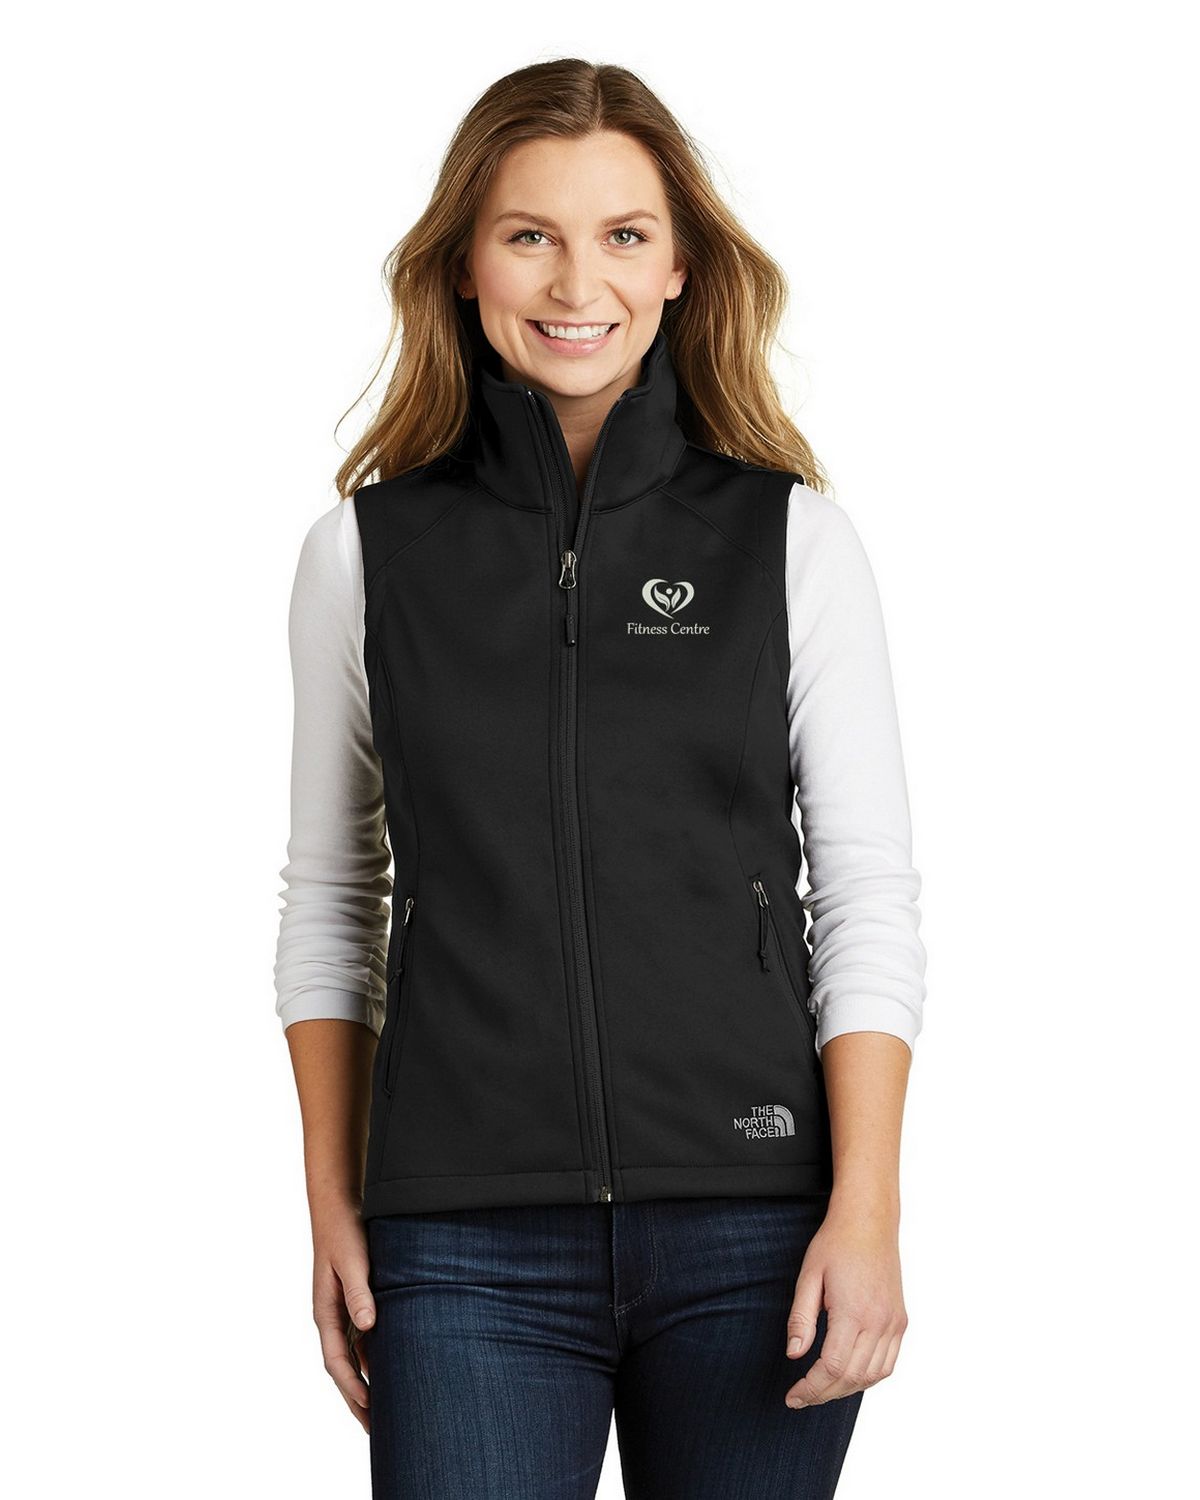 The North Face NF0A3LH1 Ladies Ridgeline Soft Shell Vest